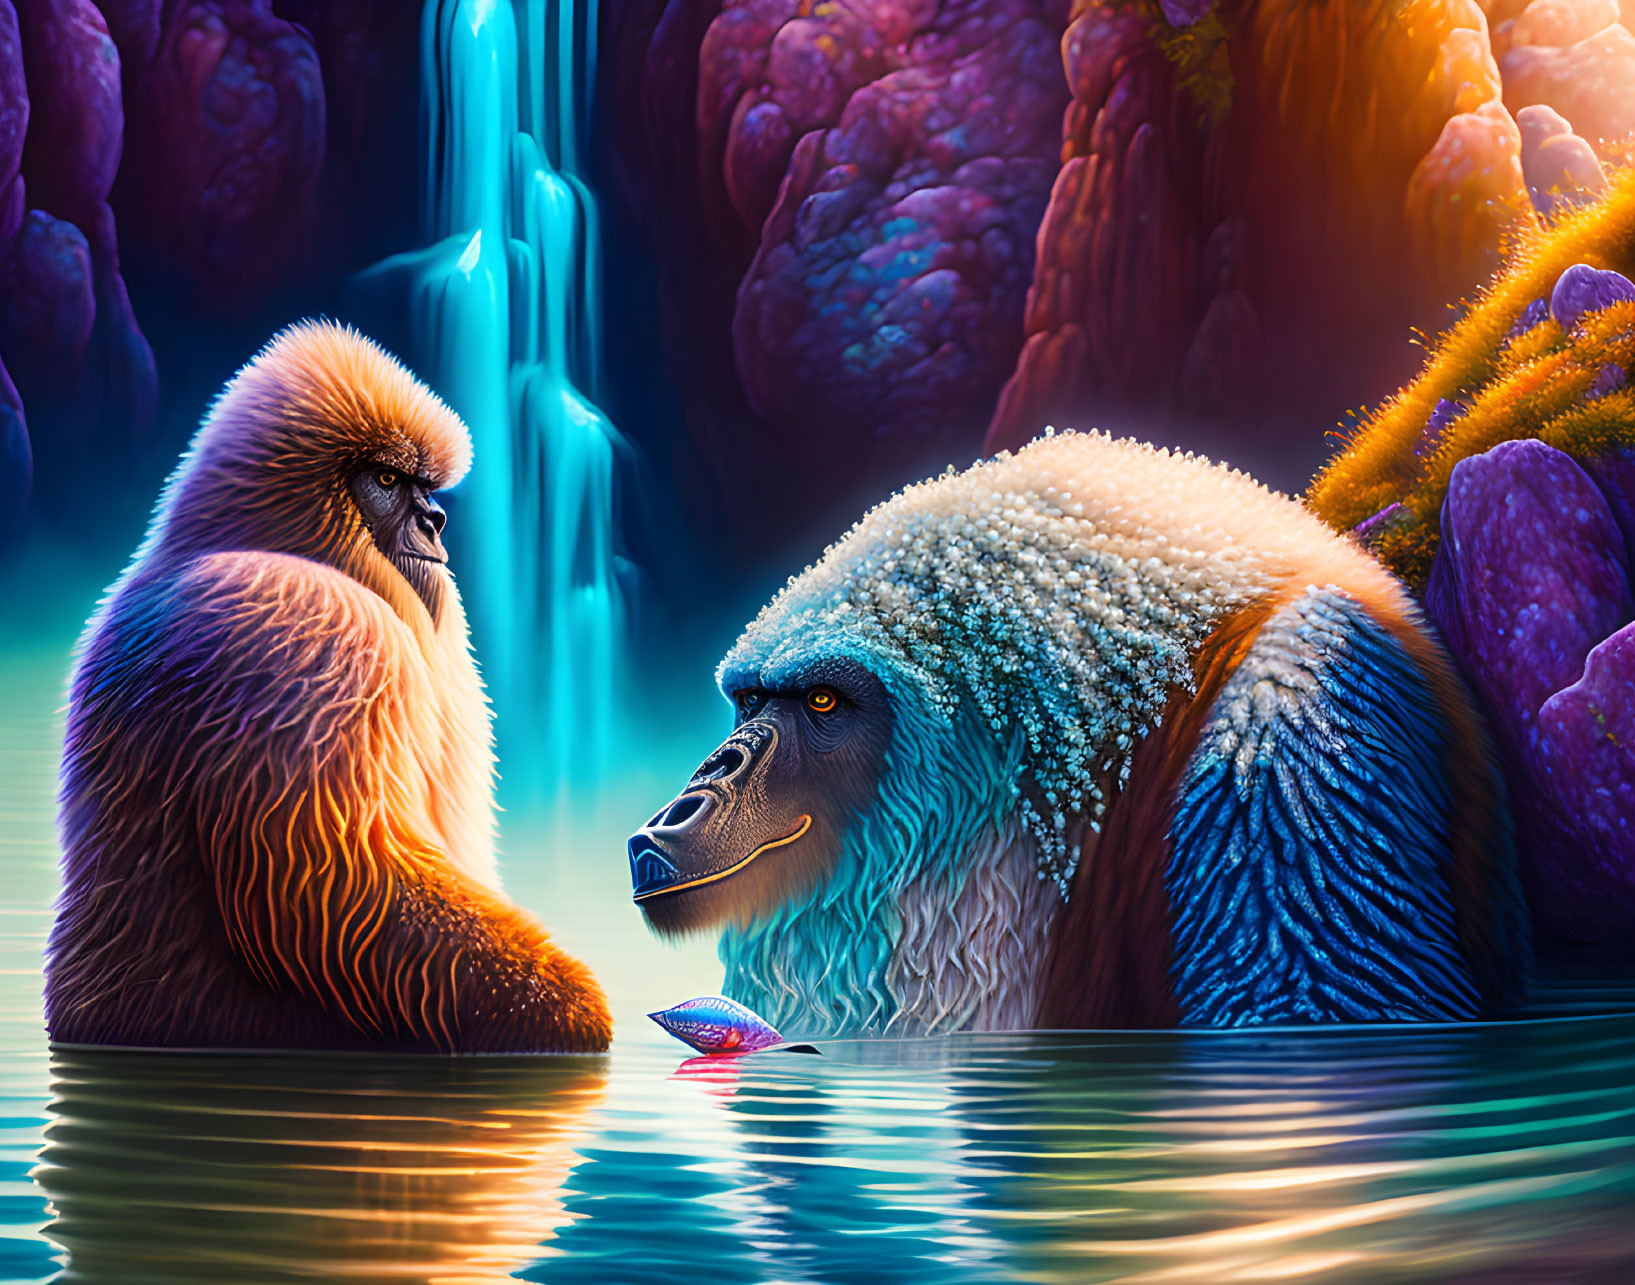 Colorful Gorillas by Luminous Waterfall Amid Exotic Flora